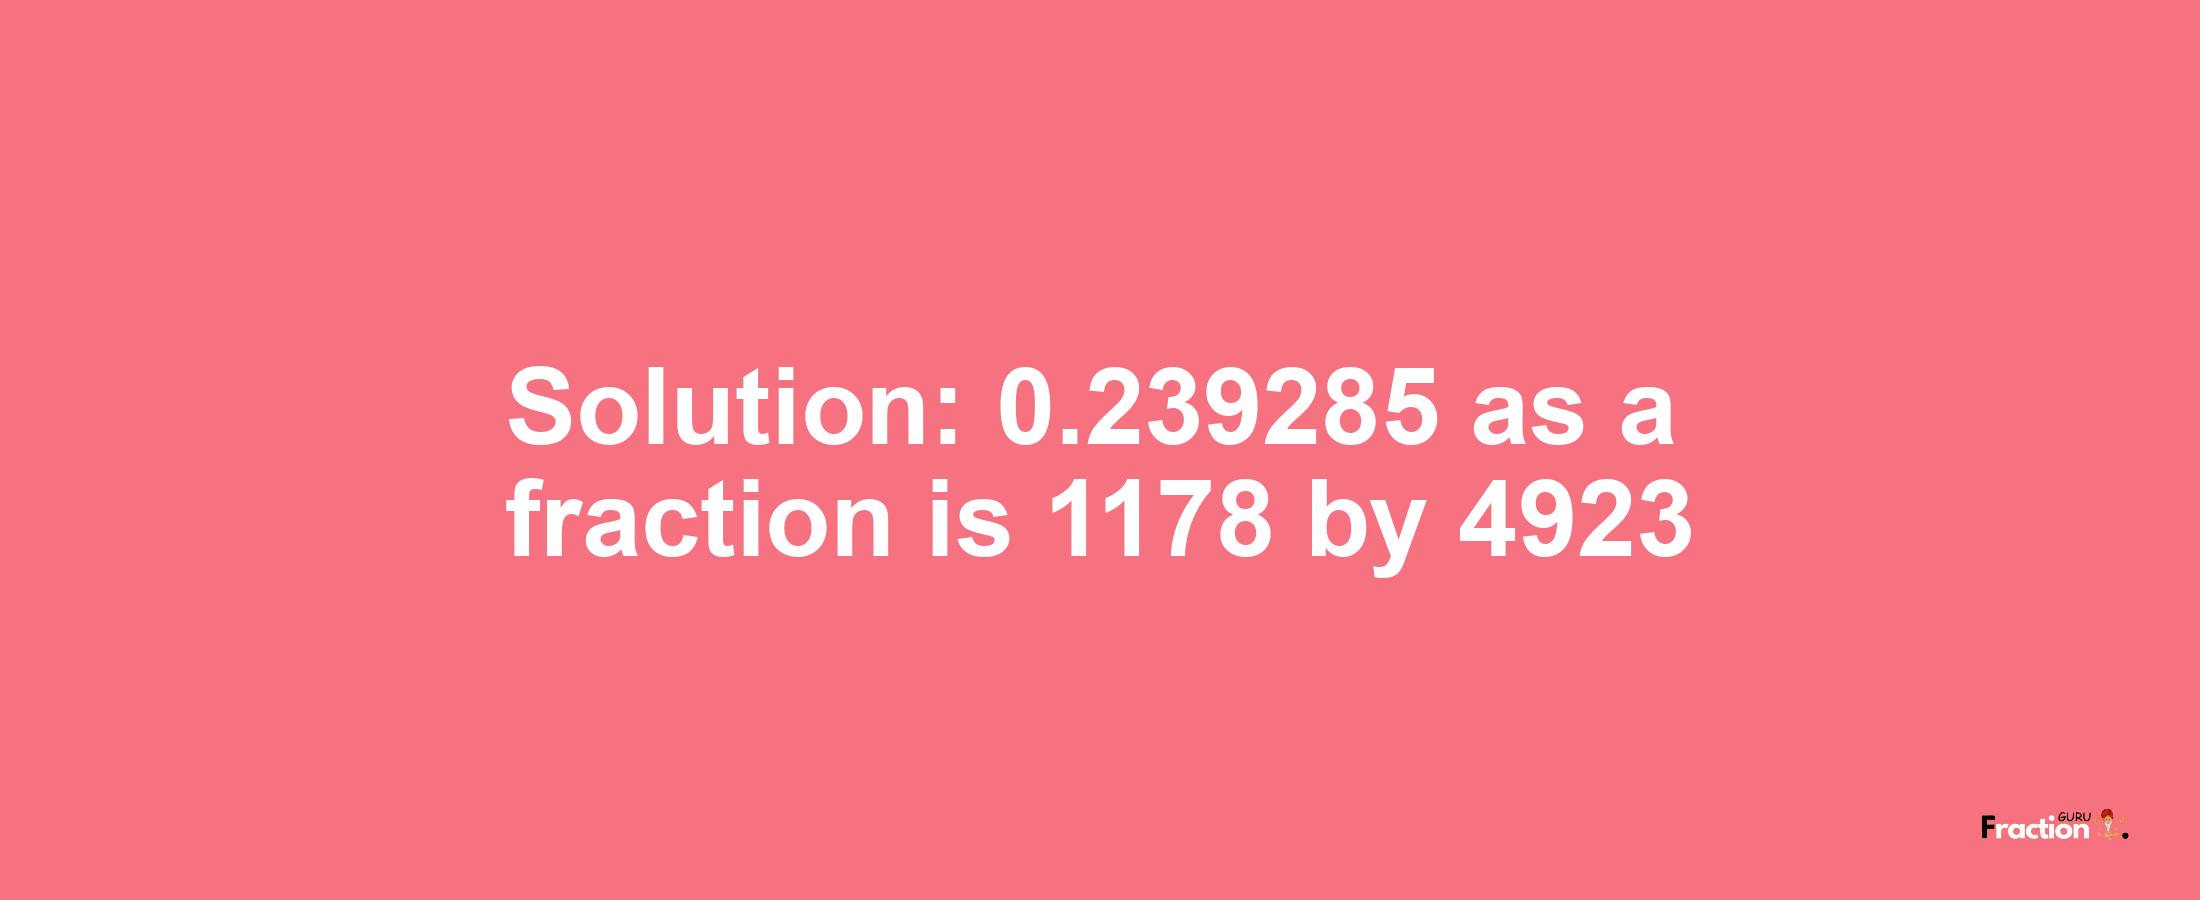 Solution:0.239285 as a fraction is 1178/4923